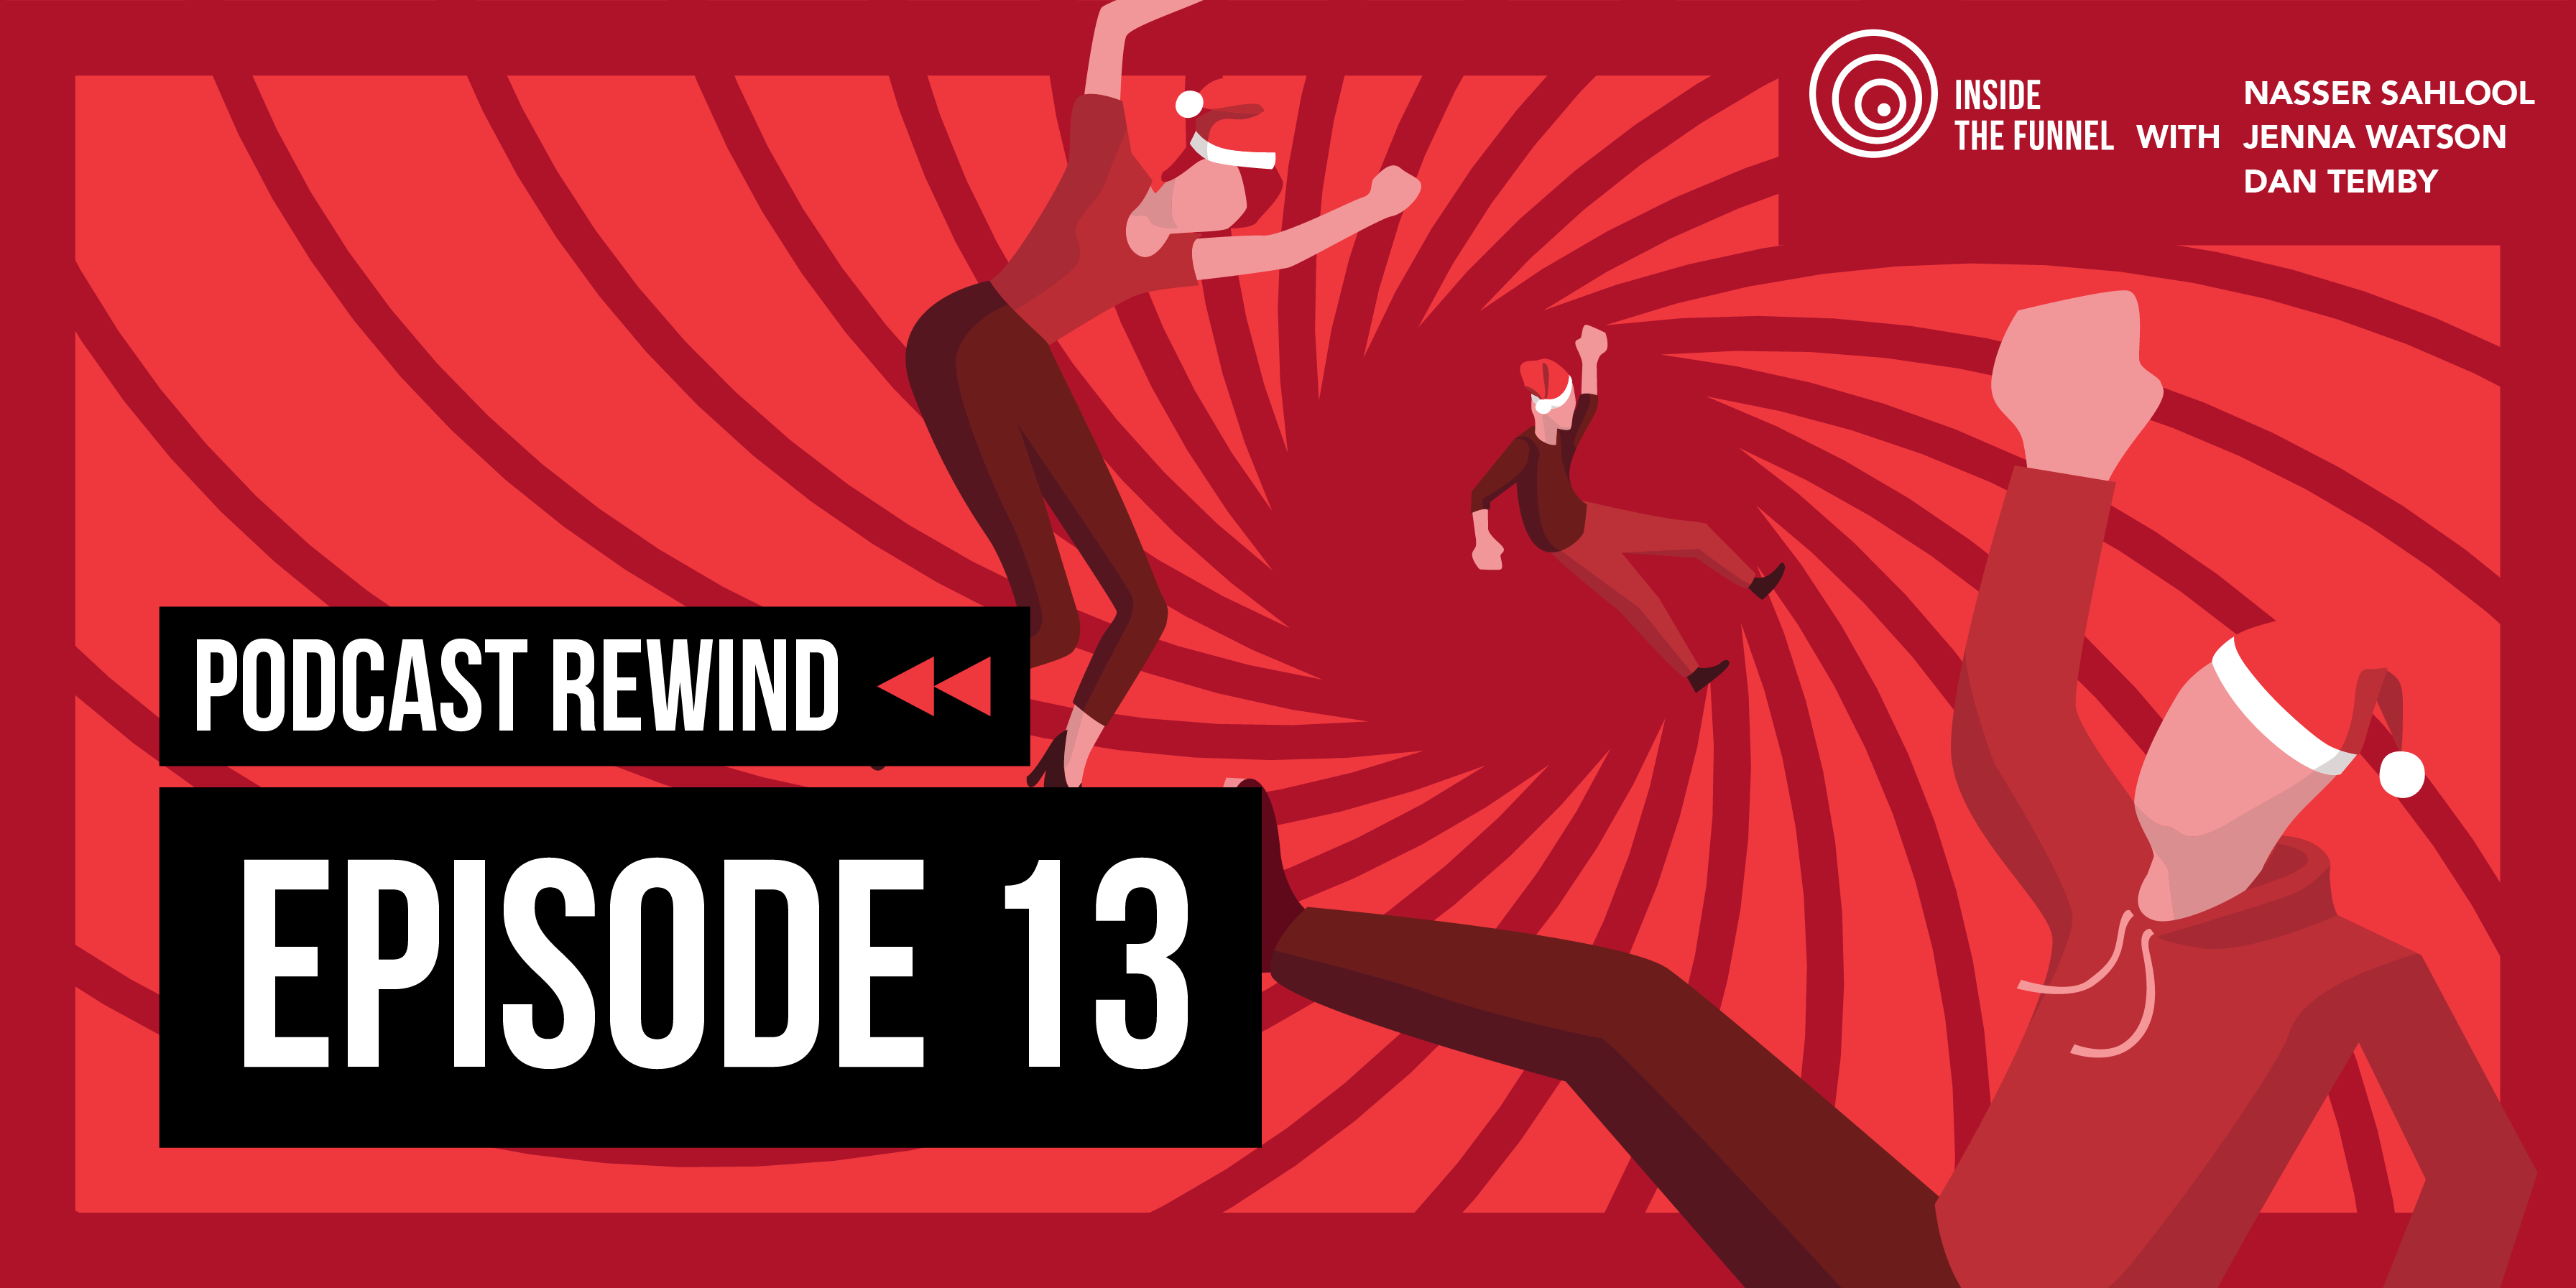 Podcast rewind: 4 predictions and pitfalls for the new year